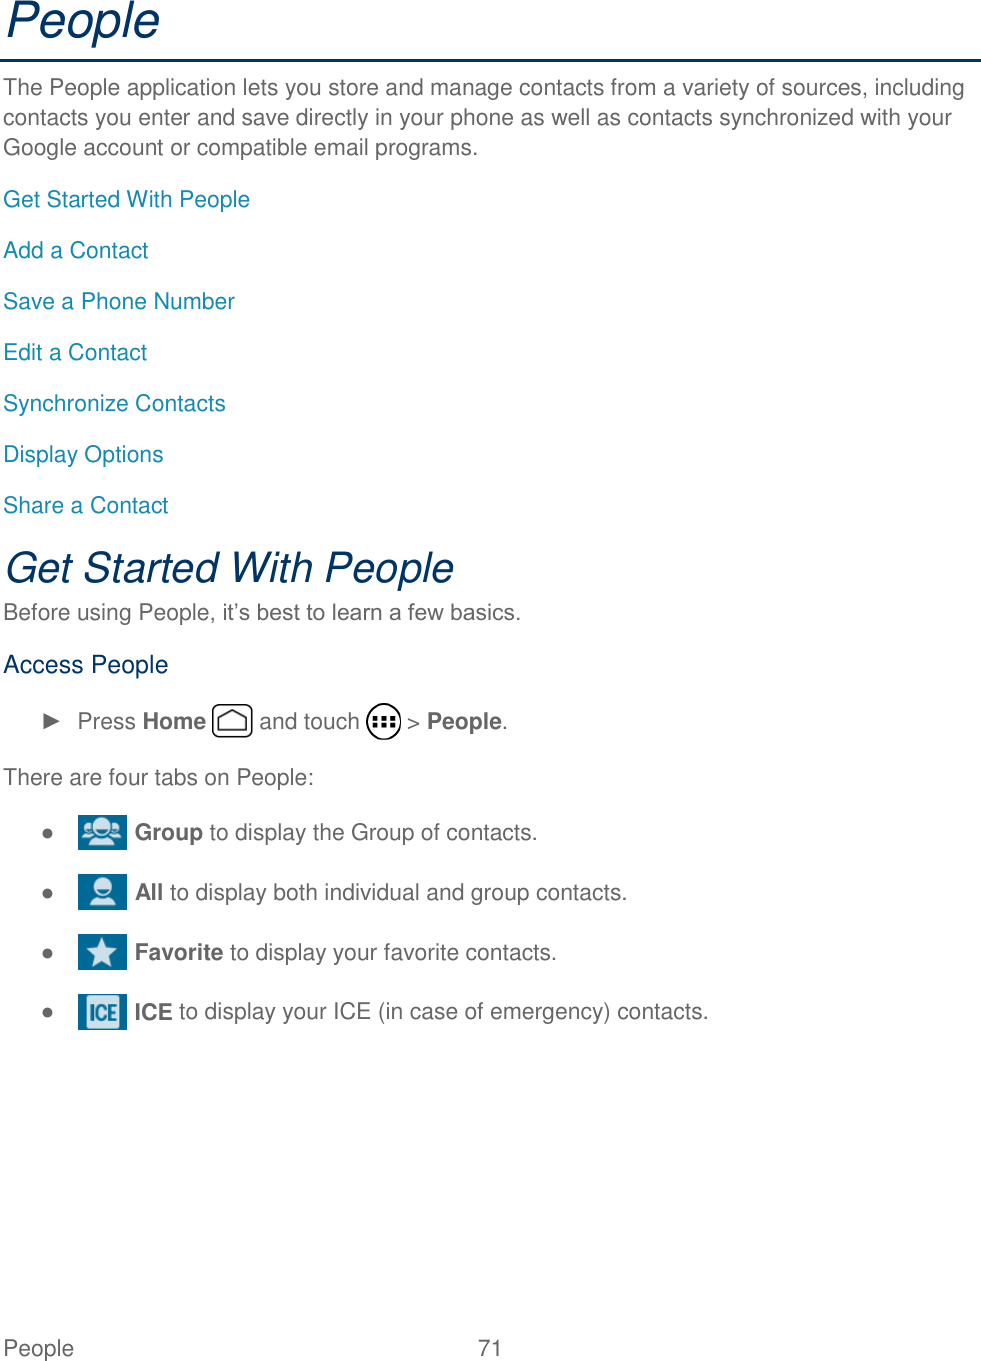  People  71   People The People application lets you store and manage contacts from a variety of sources, including contacts you enter and save directly in your phone as well as contacts synchronized with your Google account or compatible email programs. Get Started With People Add a Contact Save a Phone Number Edit a Contact Synchronize Contacts Display Options Share a Contact Get Started With People Before using People, it’s best to learn a few basics. Access People ►  Press Home   and touch   &gt; People. There are four tabs on People: ●   Group to display the Group of contacts. ●   All to display both individual and group contacts. ●   Favorite to display your favorite contacts. ●   ICE to display your ICE (in case of emergency) contacts. 